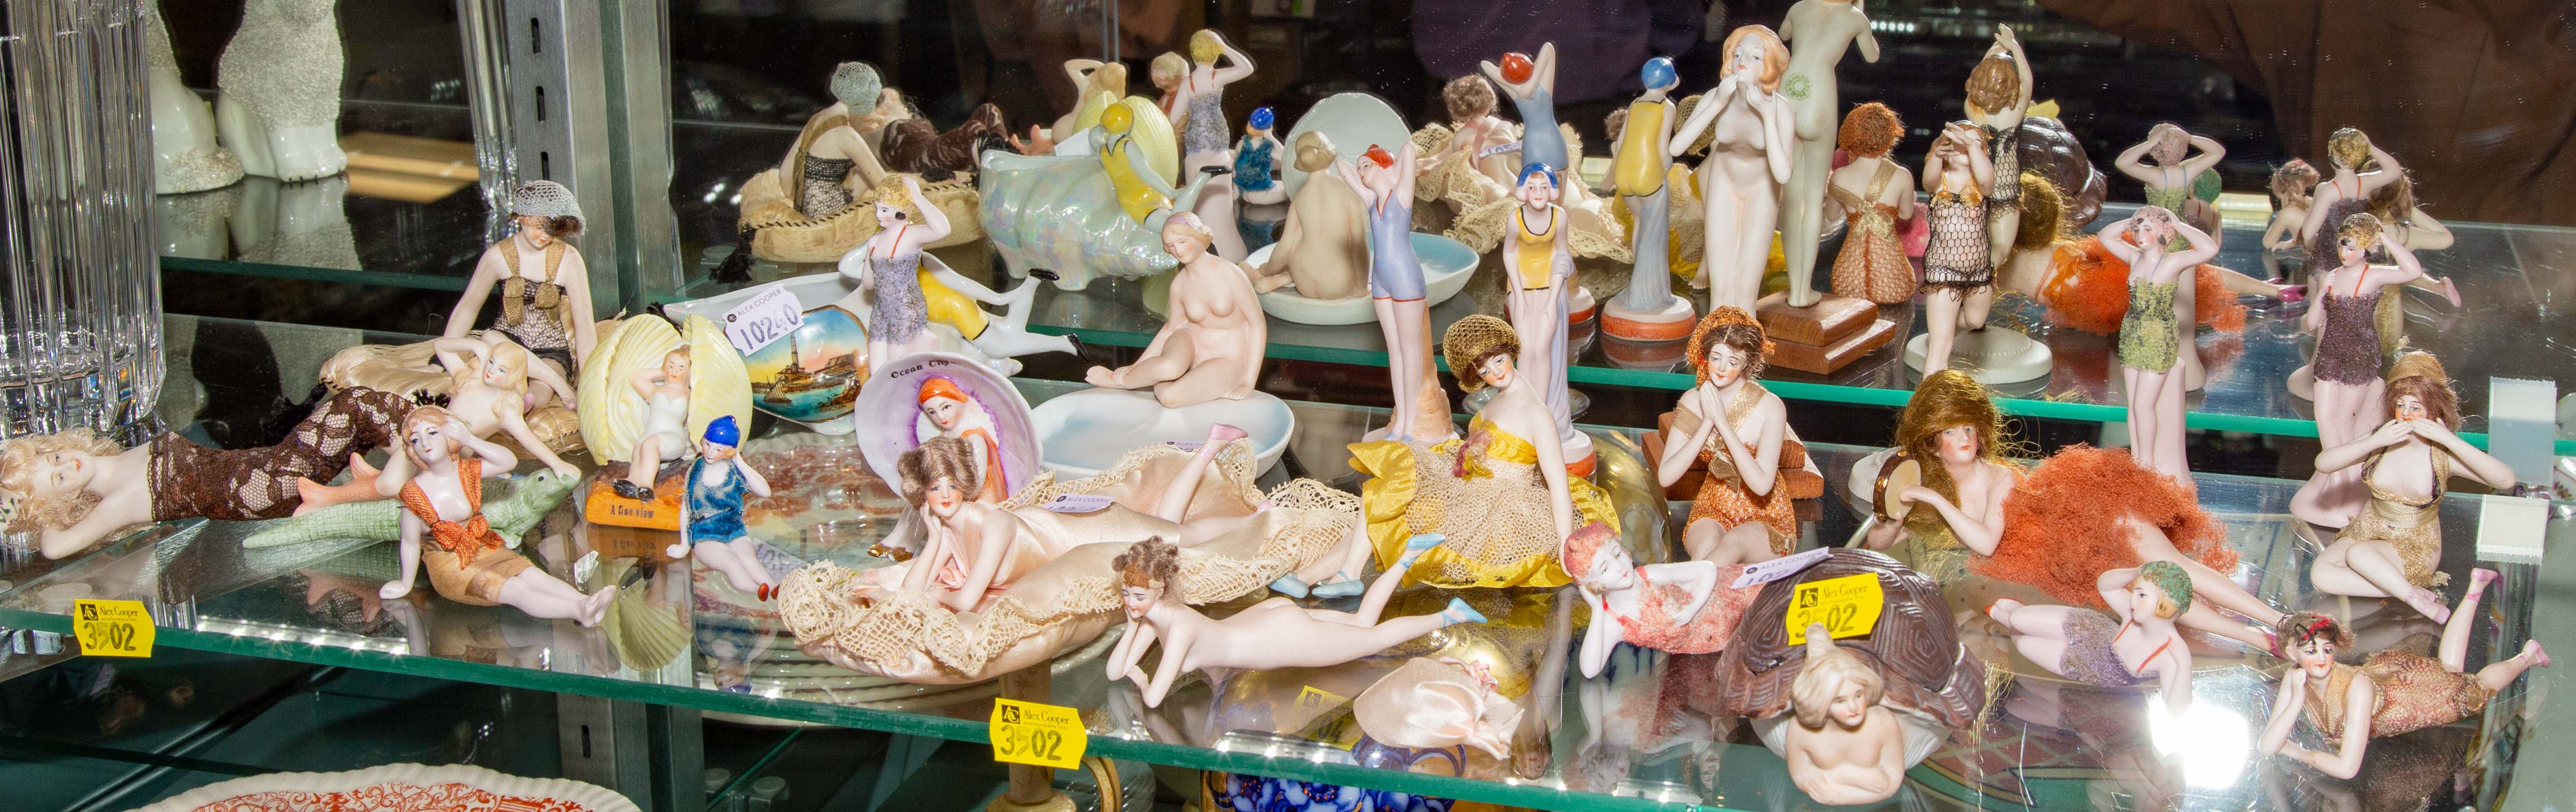 LARGE GROUP OF BISQUE RISQUE FIGURES 335654